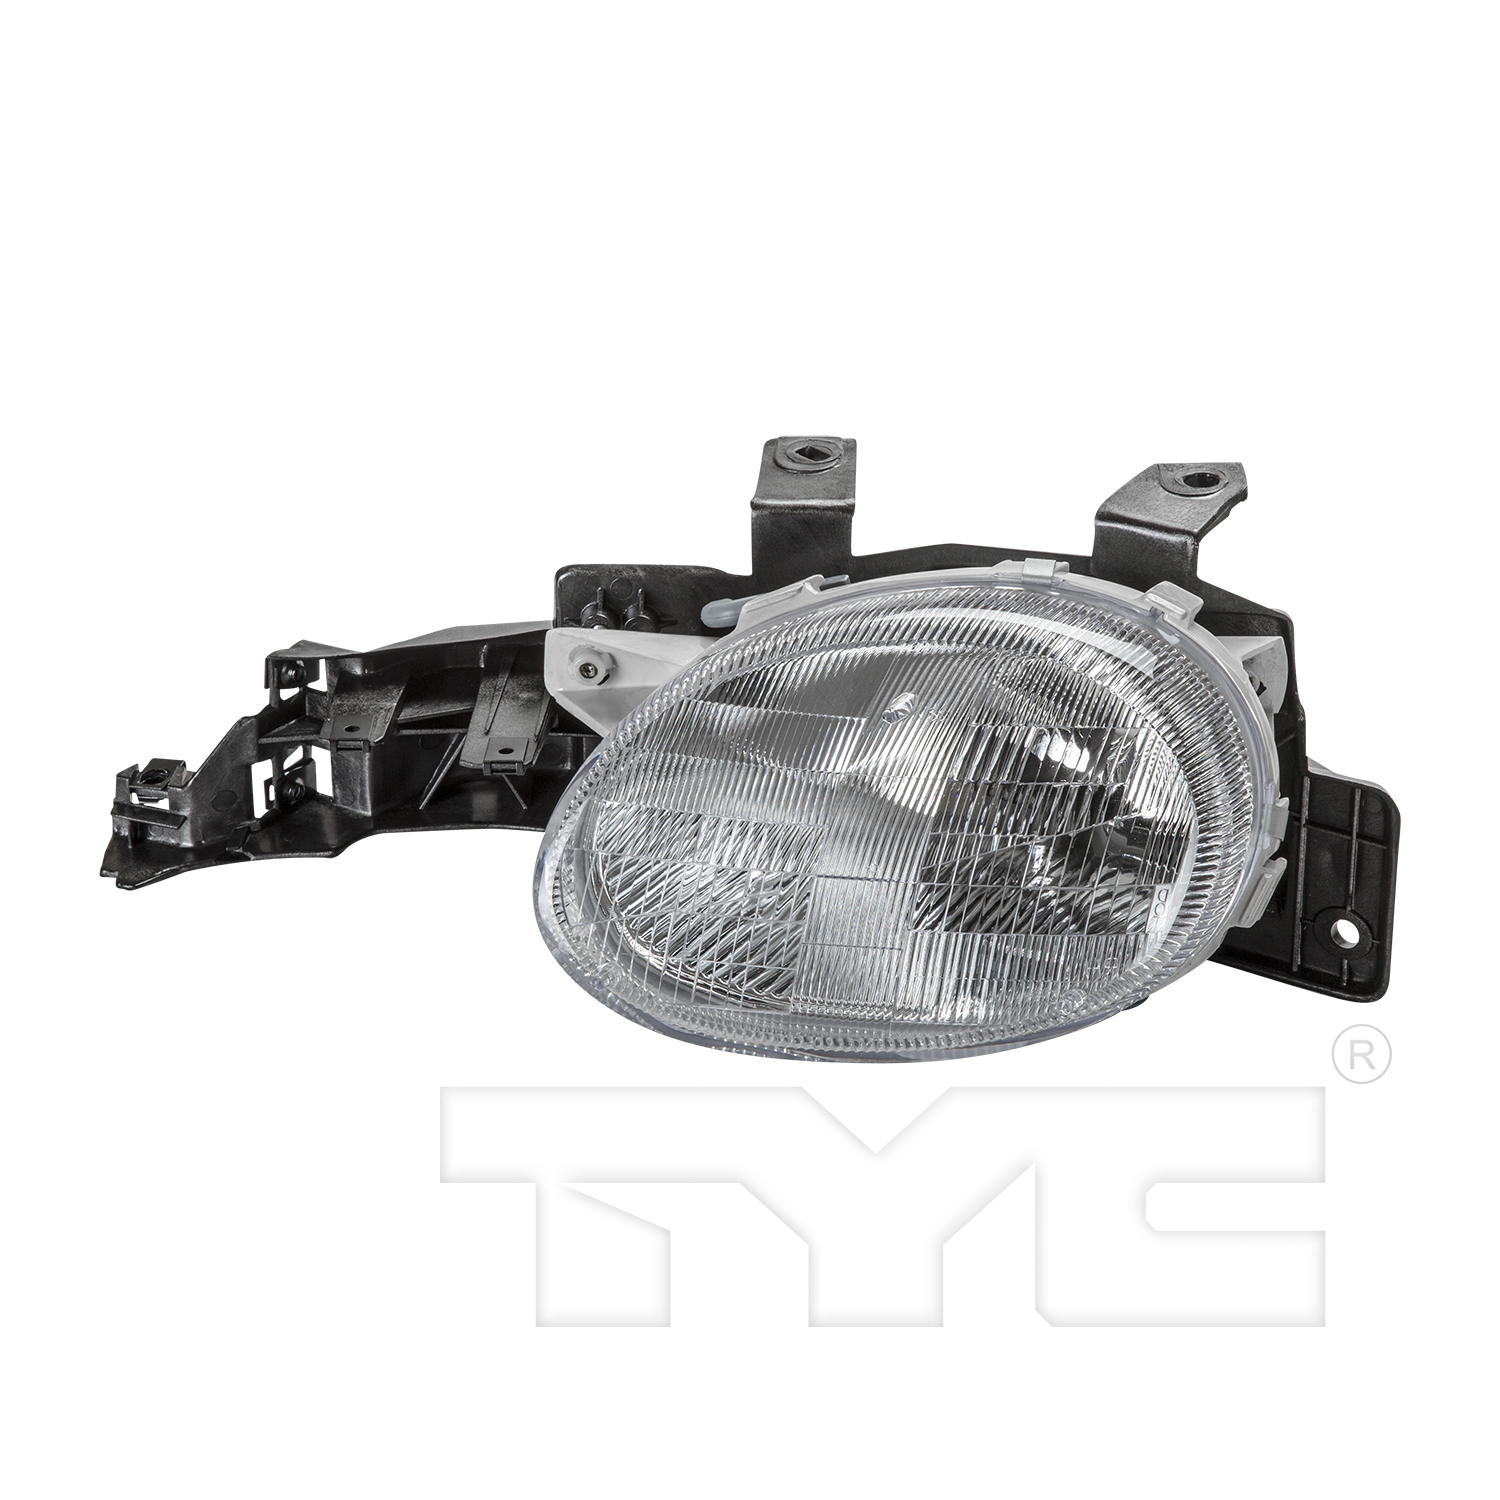 Aftermarket HEADLIGHTS for PLYMOUTH - NEON, NEON,95-99,LT Headlamp assy composite